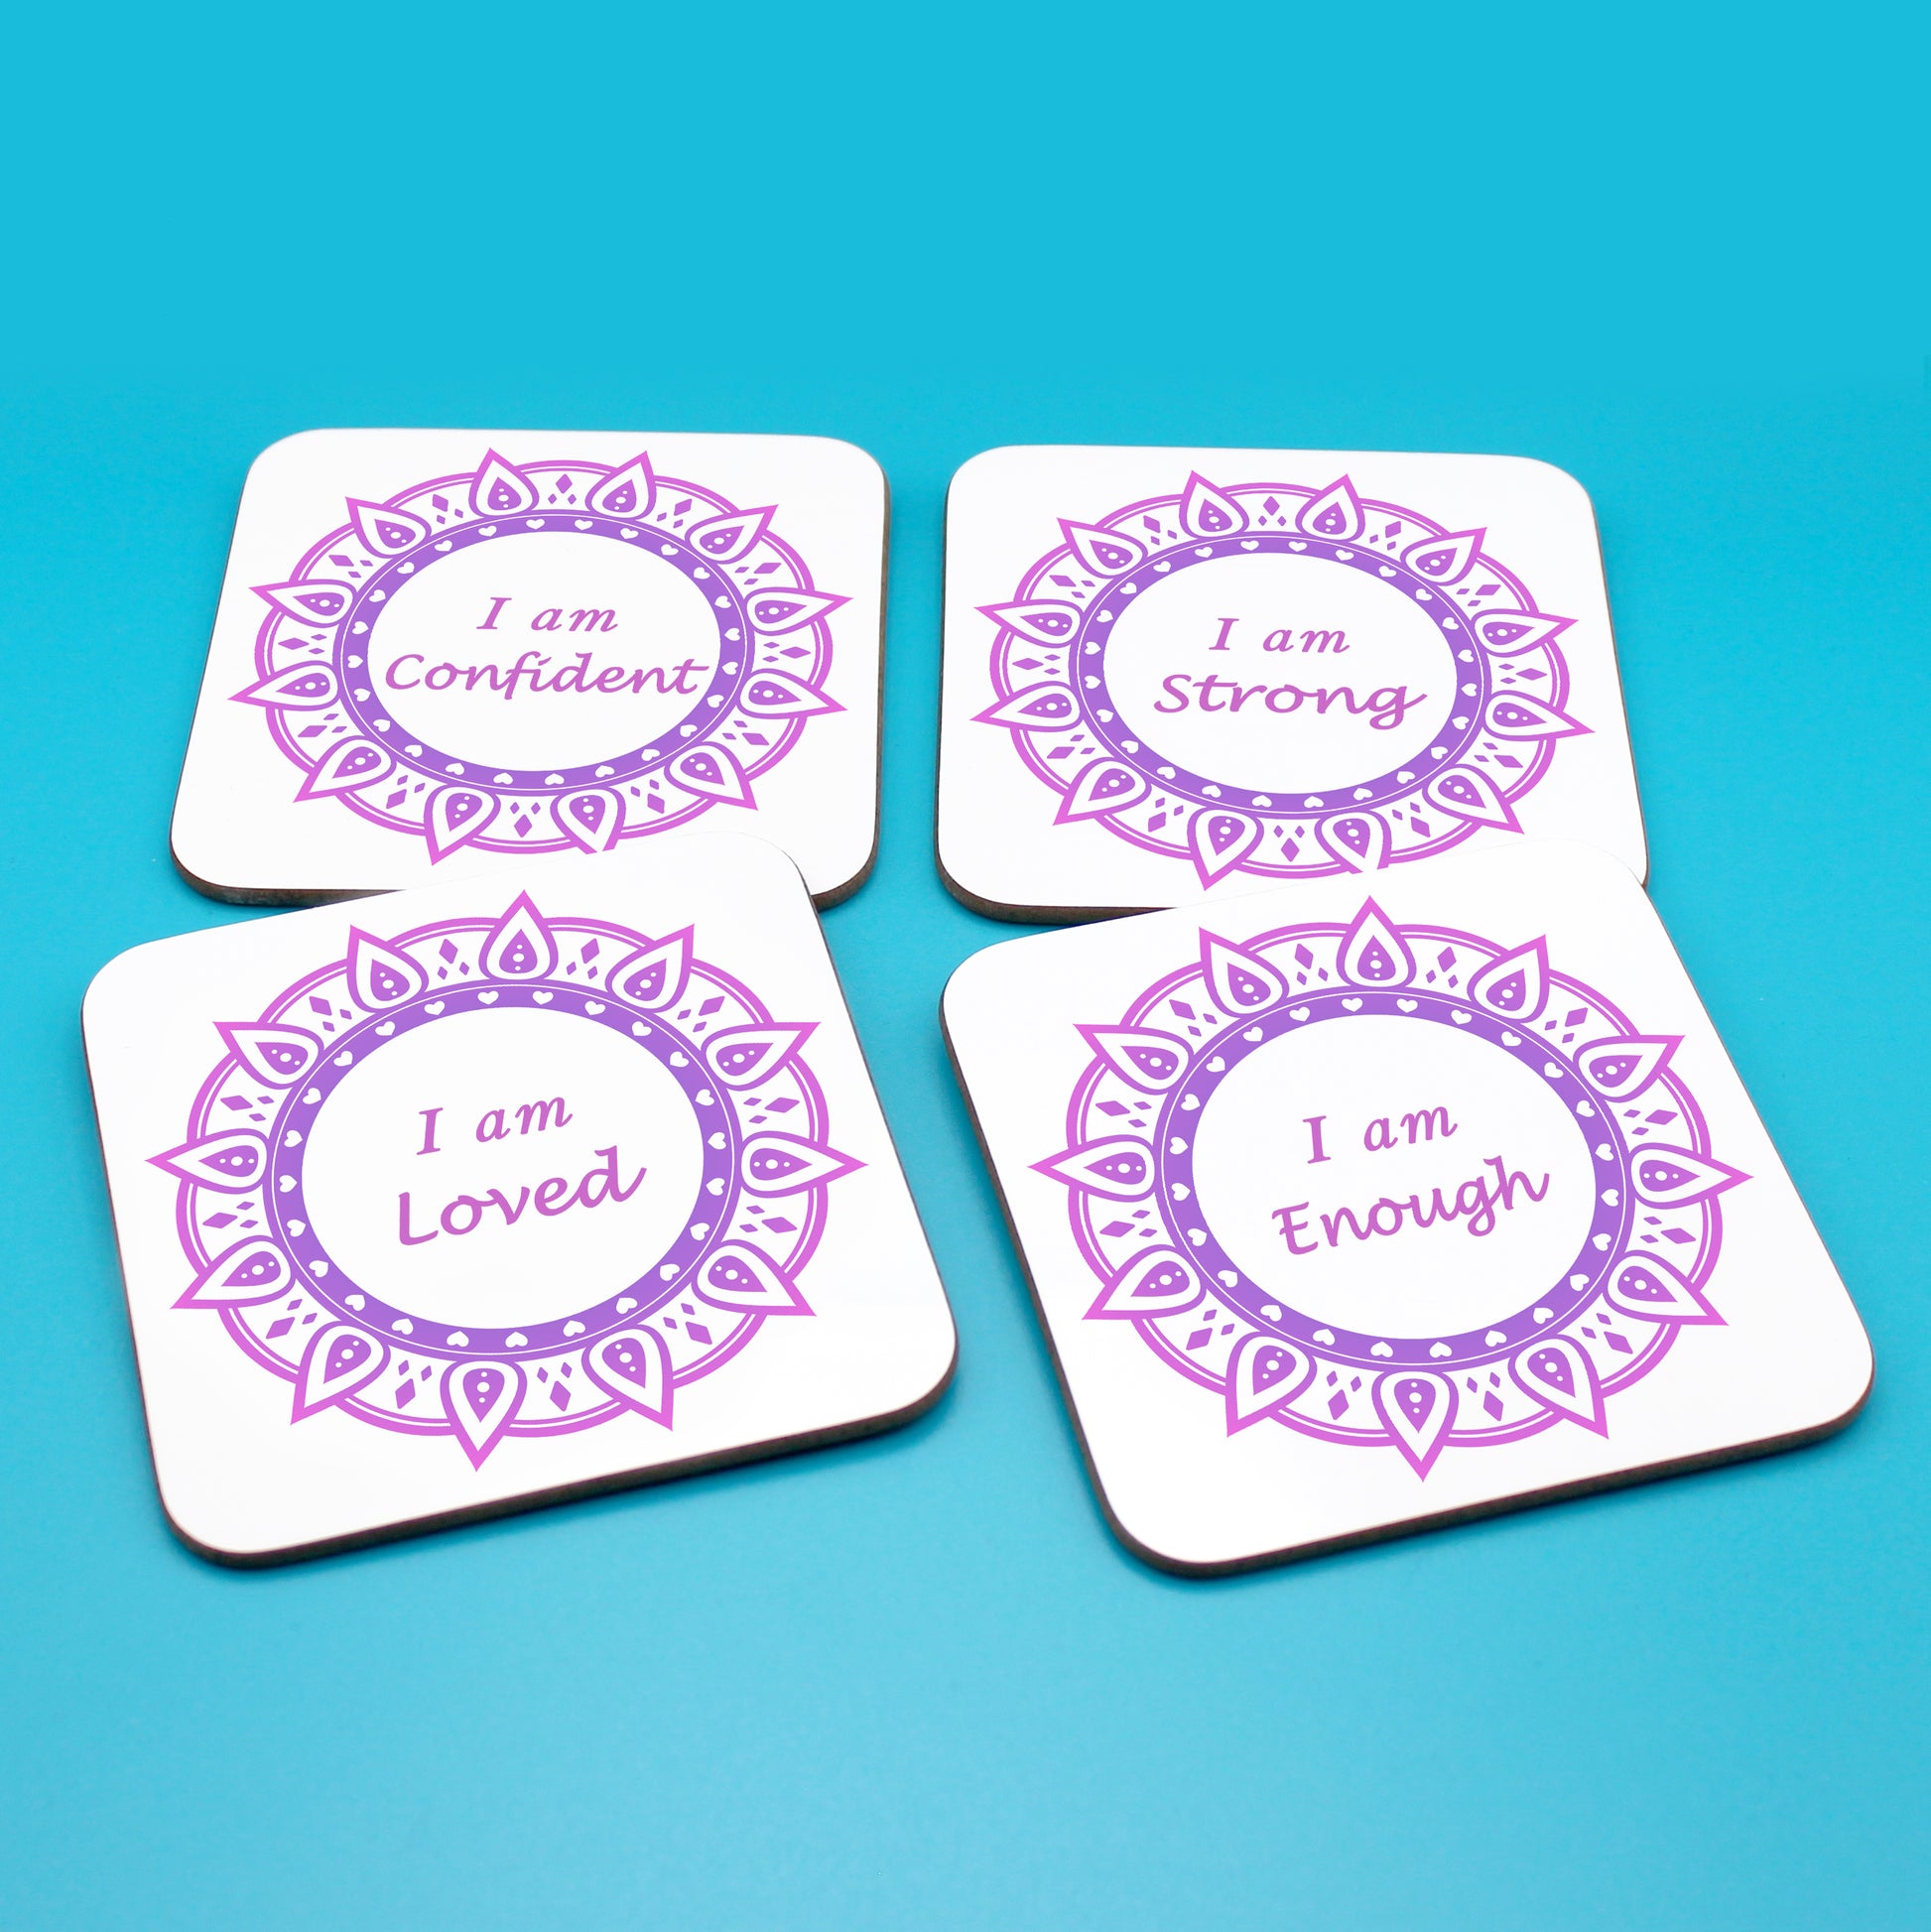 Wellbeing gift. Four square wooden backed positive affirmations coaster set. Mandala design with daily affirmation wording inside the mandala.  Each Affirmations coaster individually reads I am Loved, I am Enough, I am Confident, I am Strong (all mandalas are two tone purple  in this set)